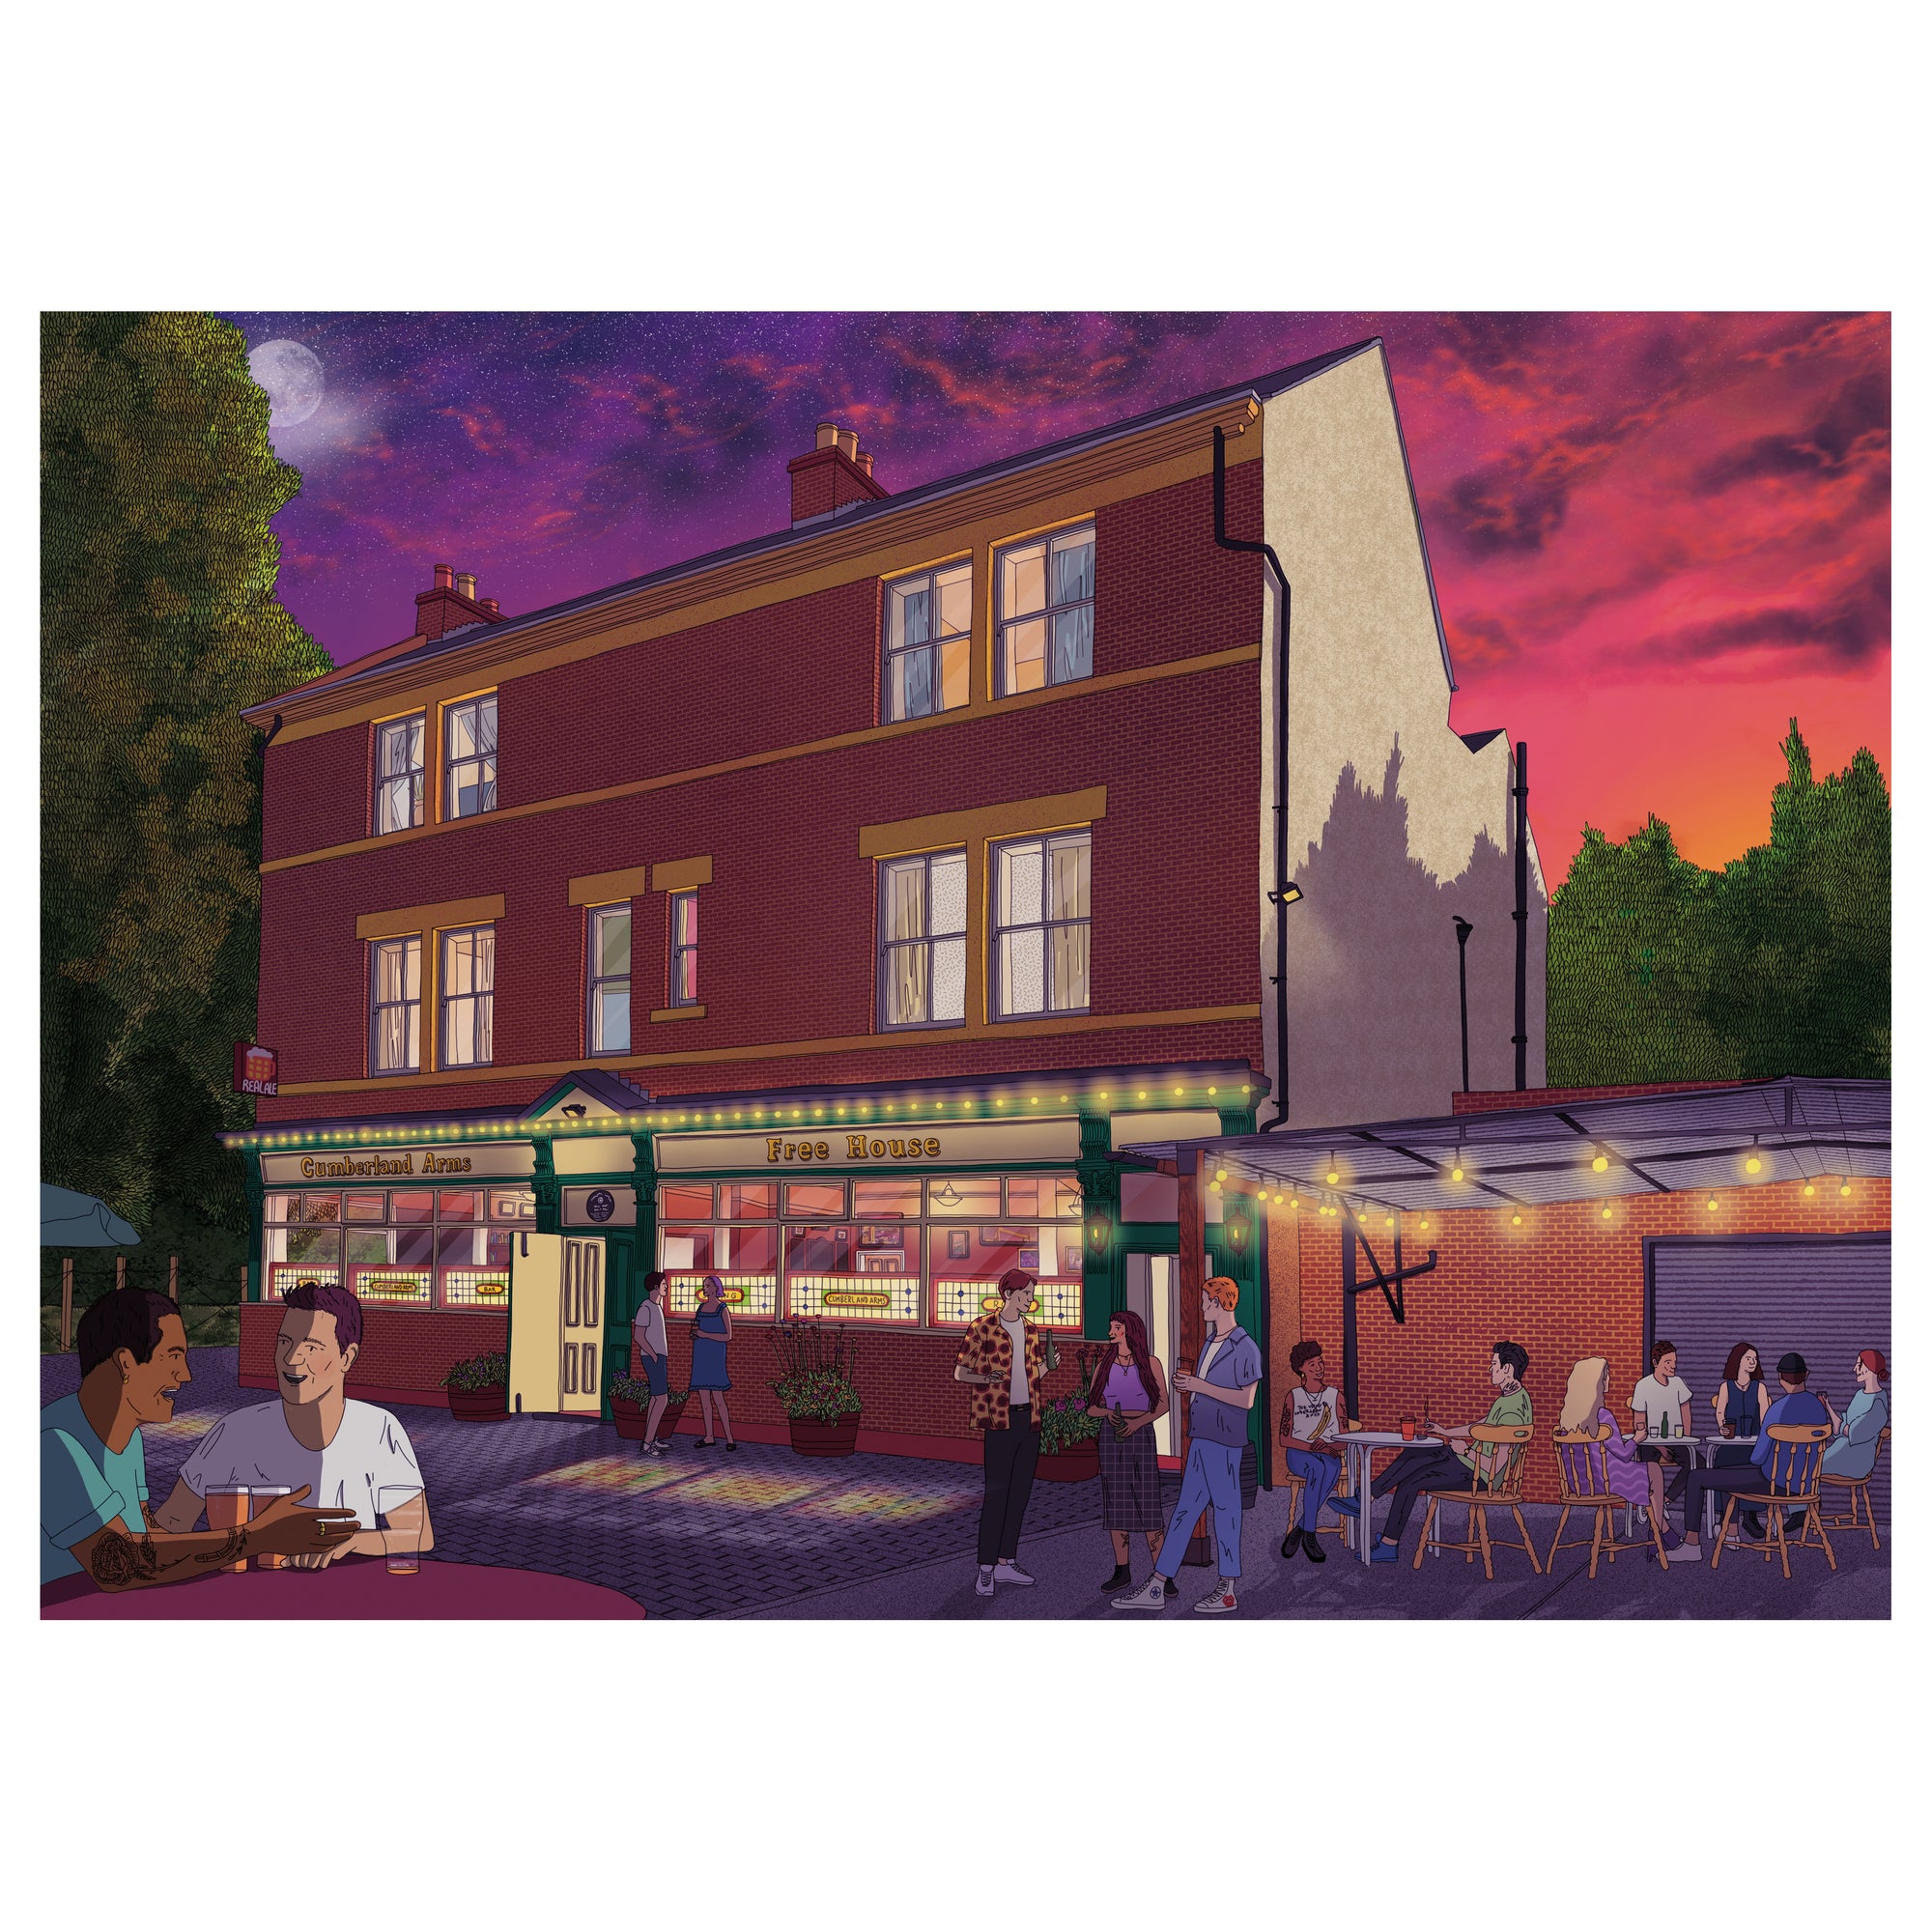 The Cumberland Arms A4 Print